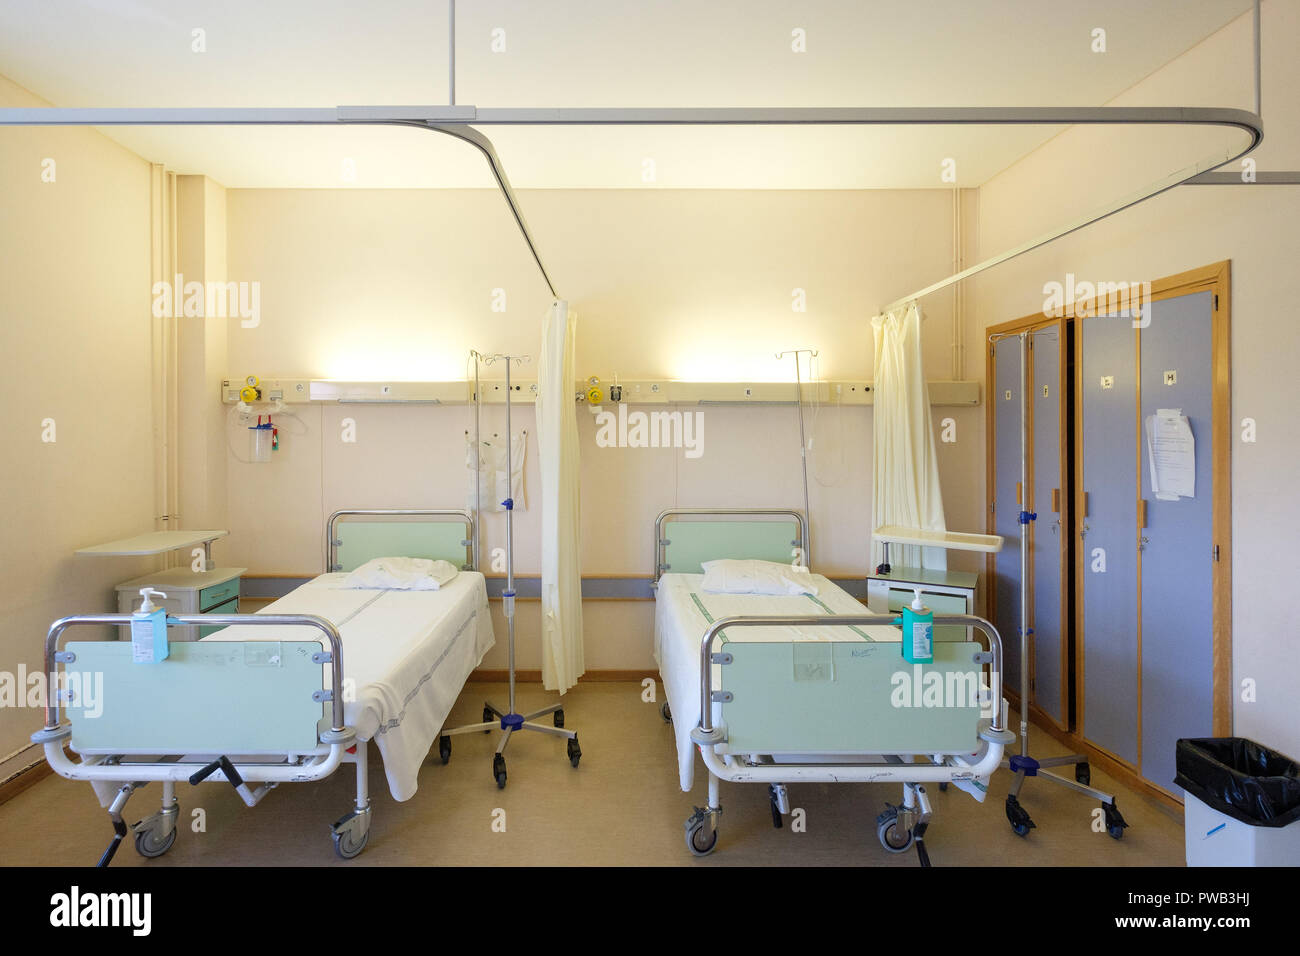 Two beds at an hospital ward Stock Photo